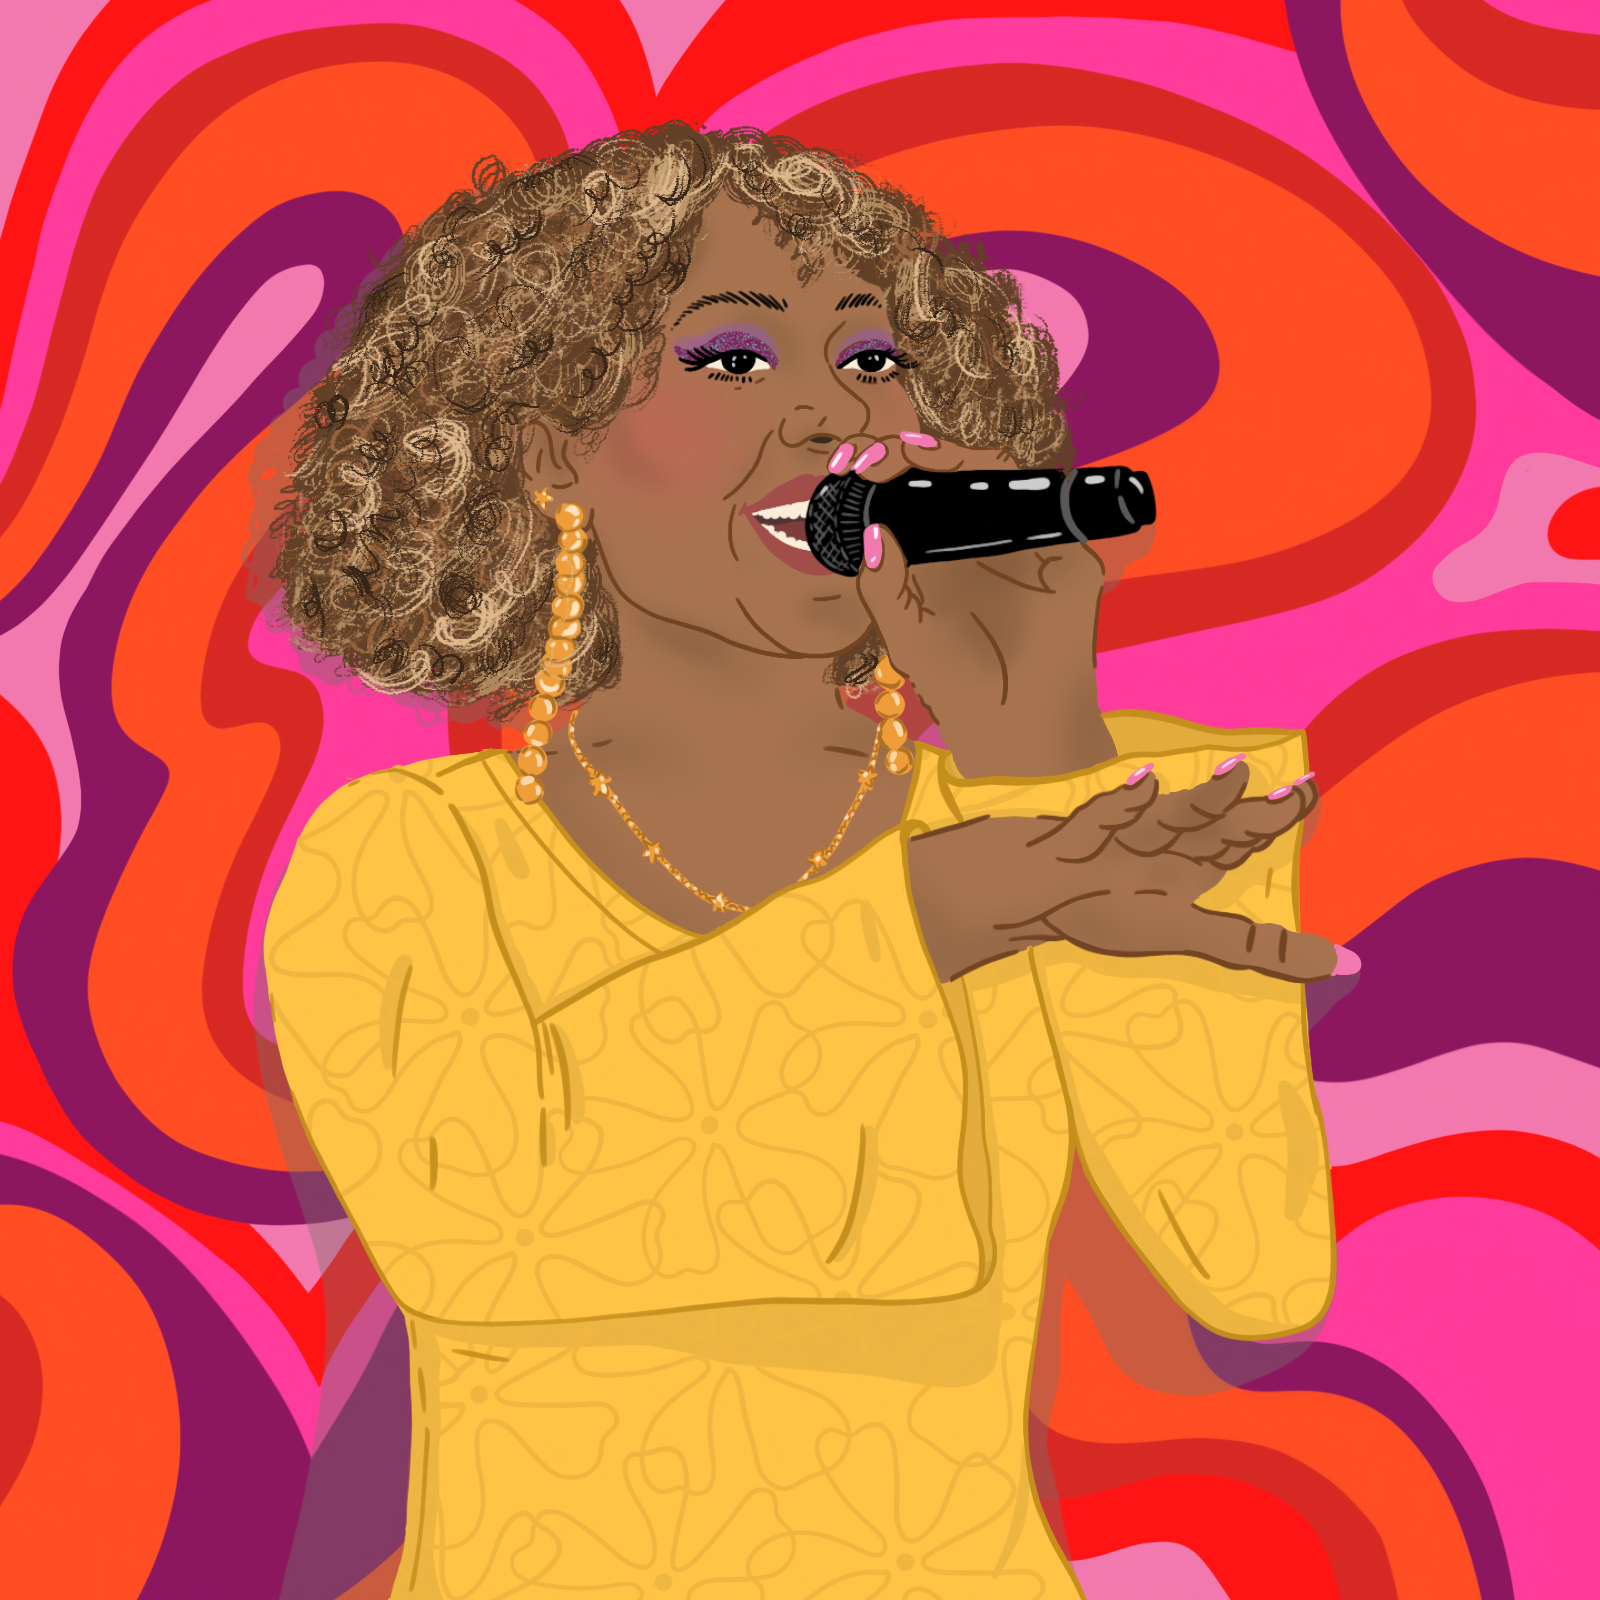 illustration of woman in music industry